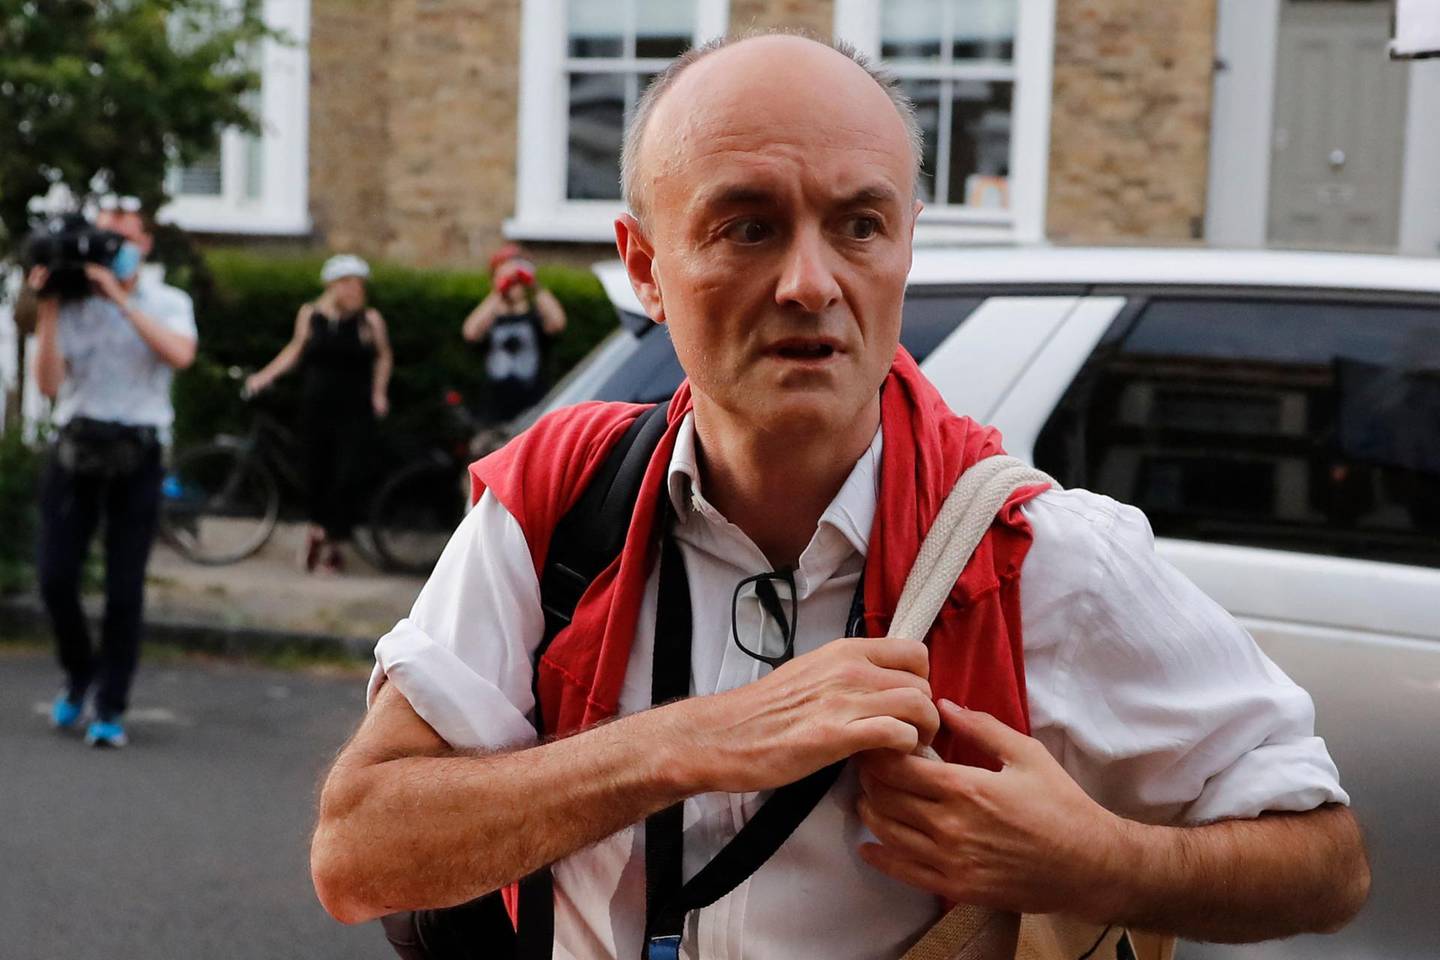 (FILES) In this file photo taken on May 25, 2020 Number 10 special advisor Dominic Cummings arrives home in London. British Prime Minister Boris Johnson's former top aide launched an extraordinary tirade Friday, April 23 after a series of incriminating leaks, claiming the Conservative leader lacks "competence and integrity". / AFP / Tolga AKMEN
